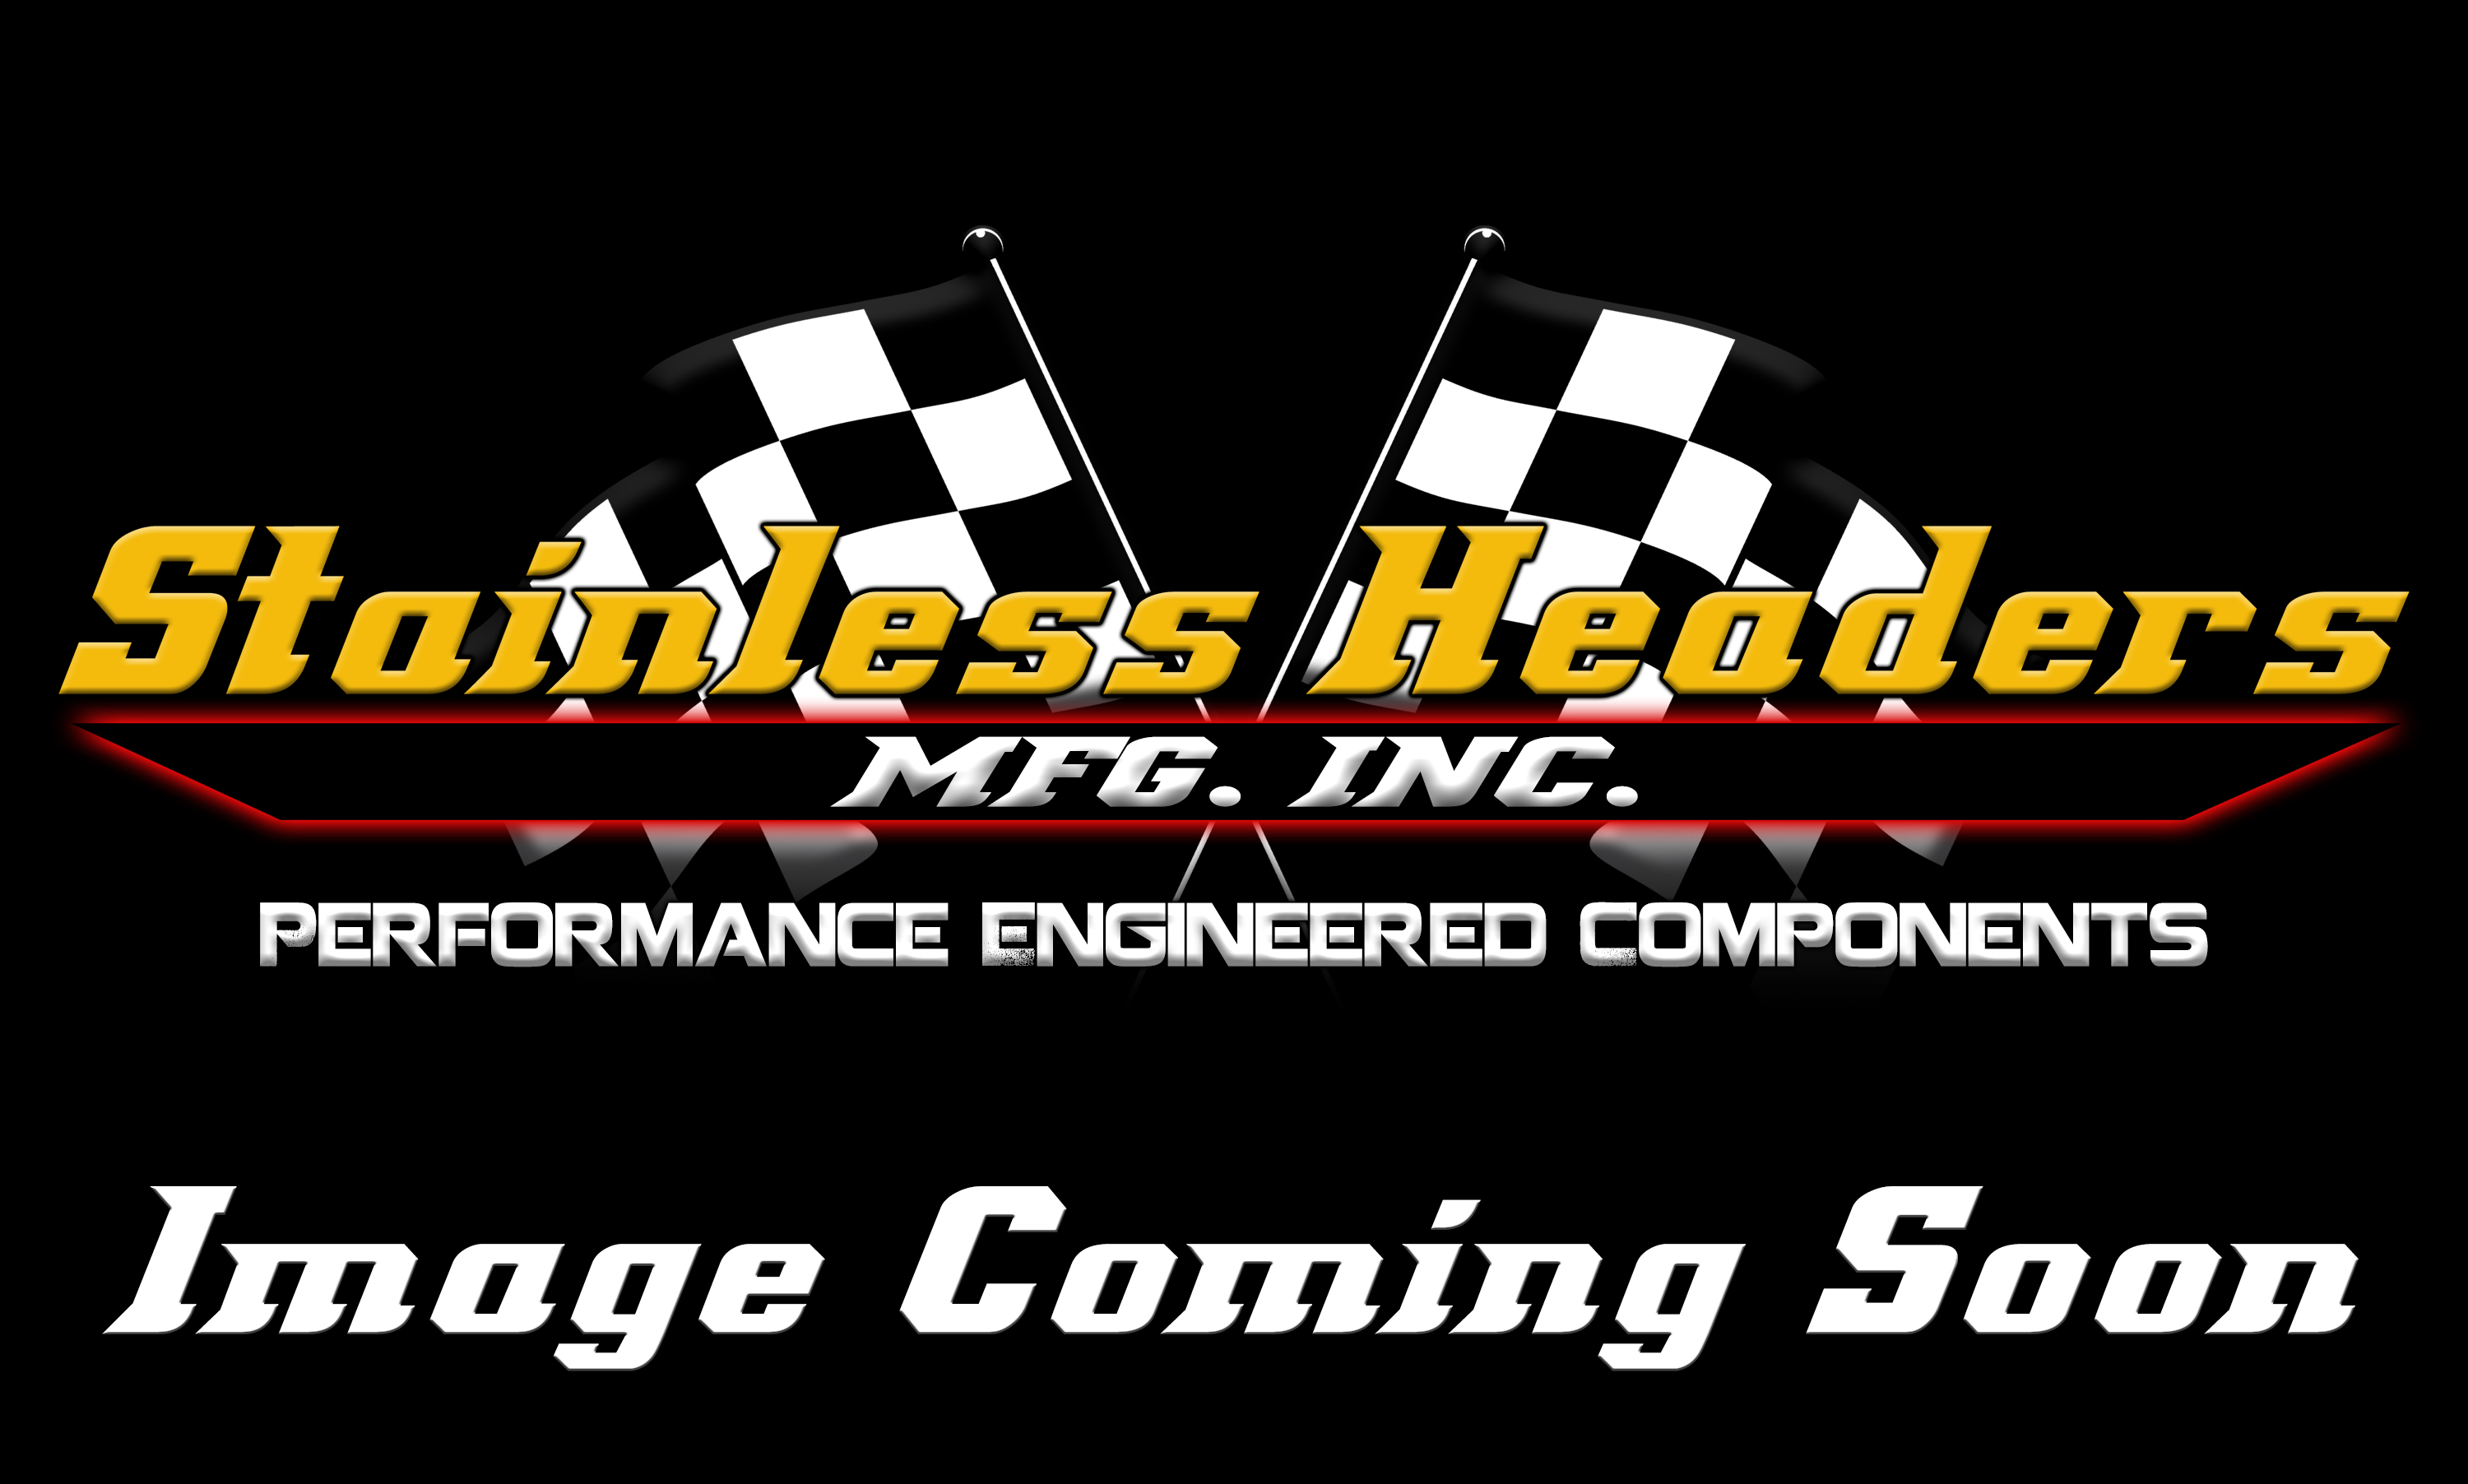 Stainless Headers - 2 1/2" Primary 4 into 1 Performance Merge Collector-16ga 321ss